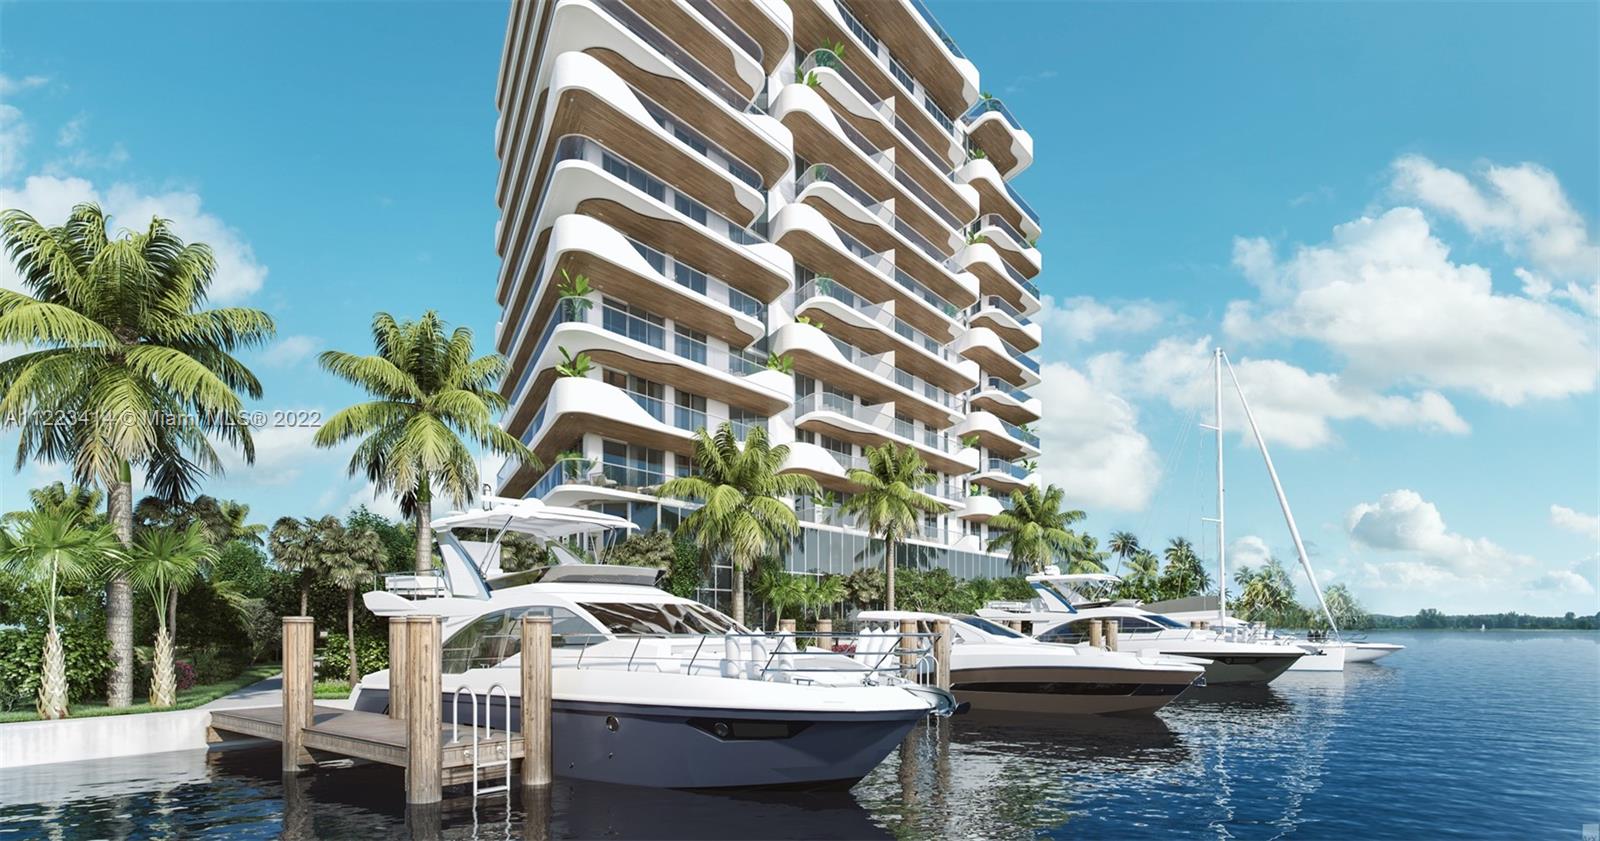 Be one of the first to enjoy the newest building in the Miami Beach Mimo district - Monaco Yacht Club. Enjoy the intercoastal views from this expansive outdoor terrace - accessible from the bedrooms and living area. Have a boat? The sale includes a boat slip that can fit a 39ft boat. Some of the amenities included: marina slips, a rooftop pool & terrace to enjoy panoramic views of the Miami Skyline, a state-of-the-art fitness room overlooking Biscayne Bay, and exclusive beach access. Boutique building with only 39 residences.